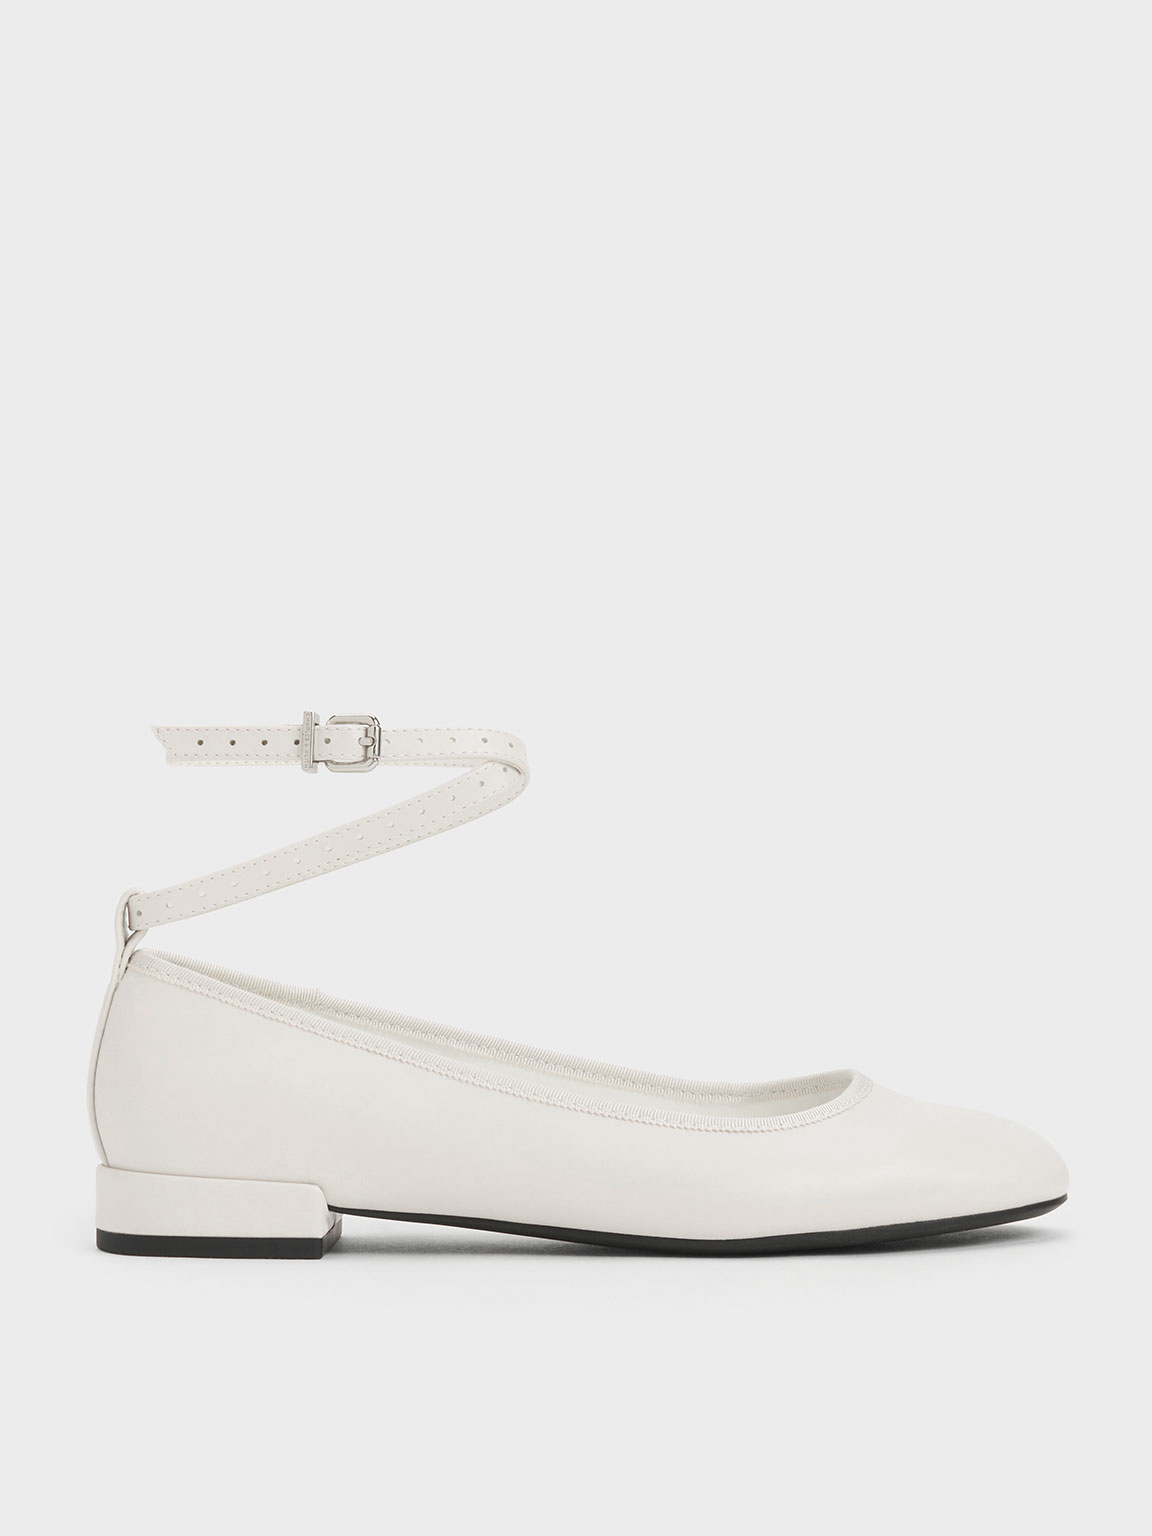 Charles & Keith Ankle-strap Ballet Flats In White